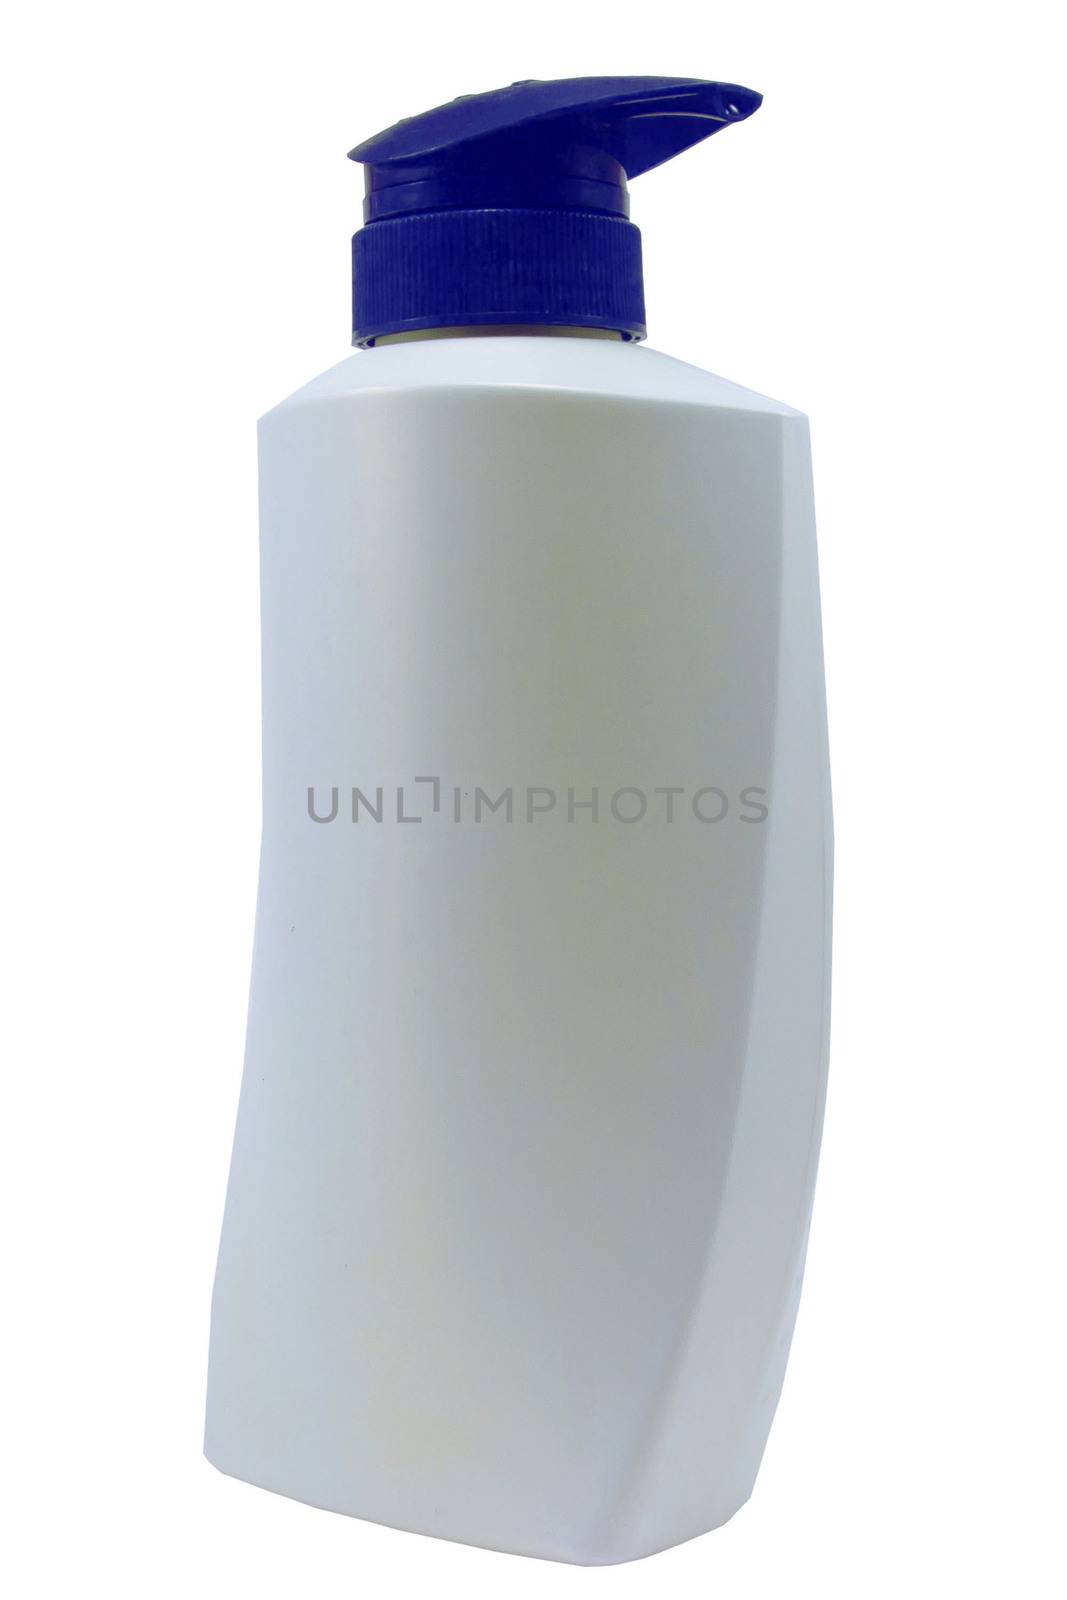 Plastic Clean White Bottle With blue  Dispenser Pump On White Background by sutipp11